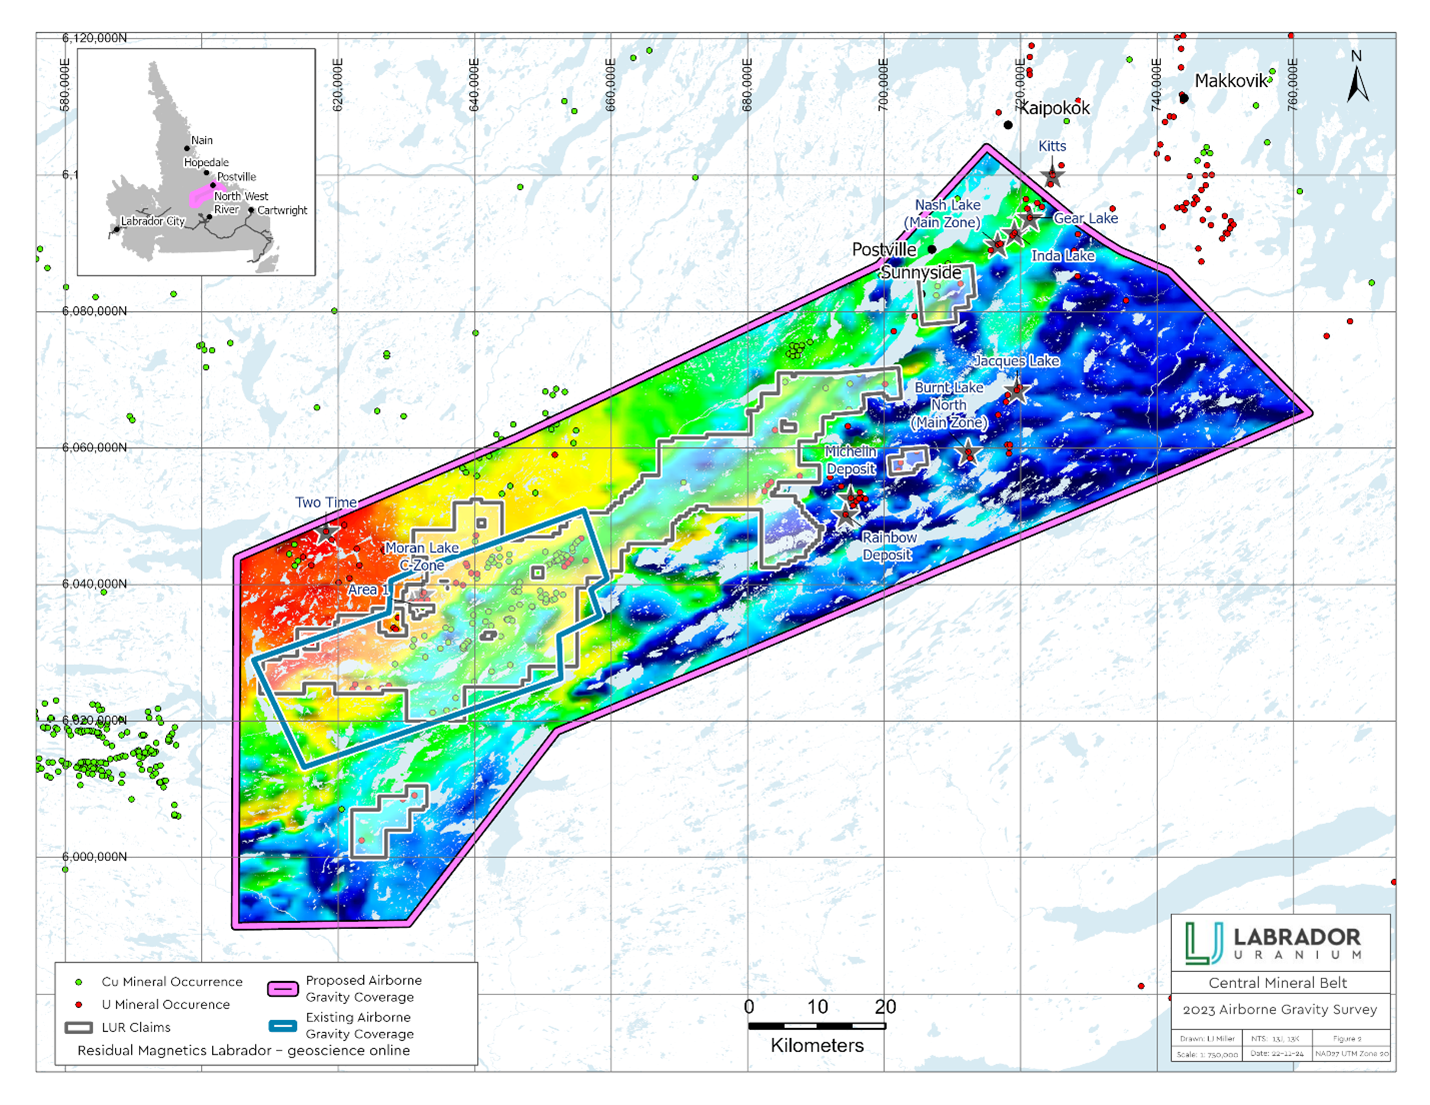 Outline of planned airborne geophysical survey for the CMB, Labrador with clipped regional residual magnetics underlay.